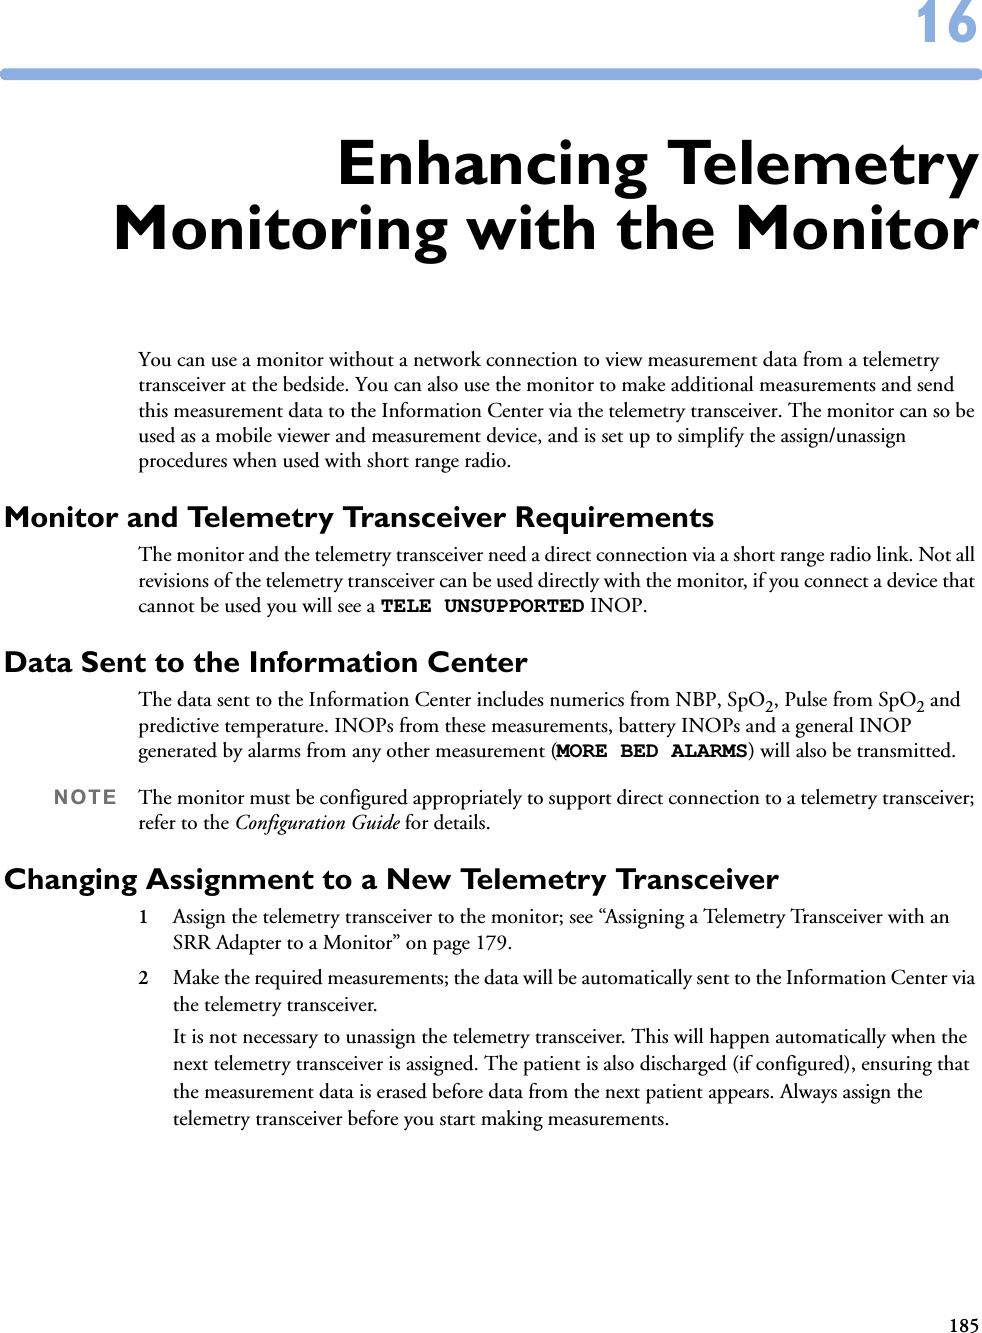 1851616Enhancing TelemetryMonitoring with the MonitorYou can use a monitor without a network connection to view measurement data from a telemetry transceiver at the bedside. You can also use the monitor to make additional measurements and send this measurement data to the Information Center via the telemetry transceiver. The monitor can so be used as a mobile viewer and measurement device, and is set up to simplify the assign/unassign procedures when used with short range radio. Monitor and Telemetry Transceiver RequirementsThe monitor and the telemetry transceiver need a direct connection via a short range radio link. Not all revisions of the telemetry transceiver can be used directly with the monitor, if you connect a device that cannot be used you will see a TELE UNSUPPORTED INOP. Data Sent to the Information CenterThe data sent to the Information Center includes numerics from NBP, SpO2, Pulse from SpO2 and predictive temperature. INOPs from these measurements, battery INOPs and a general INOP generated by alarms from any other measurement (MORE BED ALARMS) will also be transmitted.NOTE The monitor must be configured appropriately to support direct connection to a telemetry transceiver; refer to the Configuration Guide for details.Changing Assignment to a New Telemetry Transceiver1Assign the telemetry transceiver to the monitor; see “Assigning a Telemetry Transceiver with an SRR Adapter to a Monitor” on page 179. 2Make the required measurements; the data will be automatically sent to the Information Center via the telemetry transceiver. It is not necessary to unassign the telemetry transceiver. This will happen automatically when the next telemetry transceiver is assigned. The patient is also discharged (if configured), ensuring that the measurement data is erased before data from the next patient appears. Always assign the telemetry transceiver before you start making measurements. 